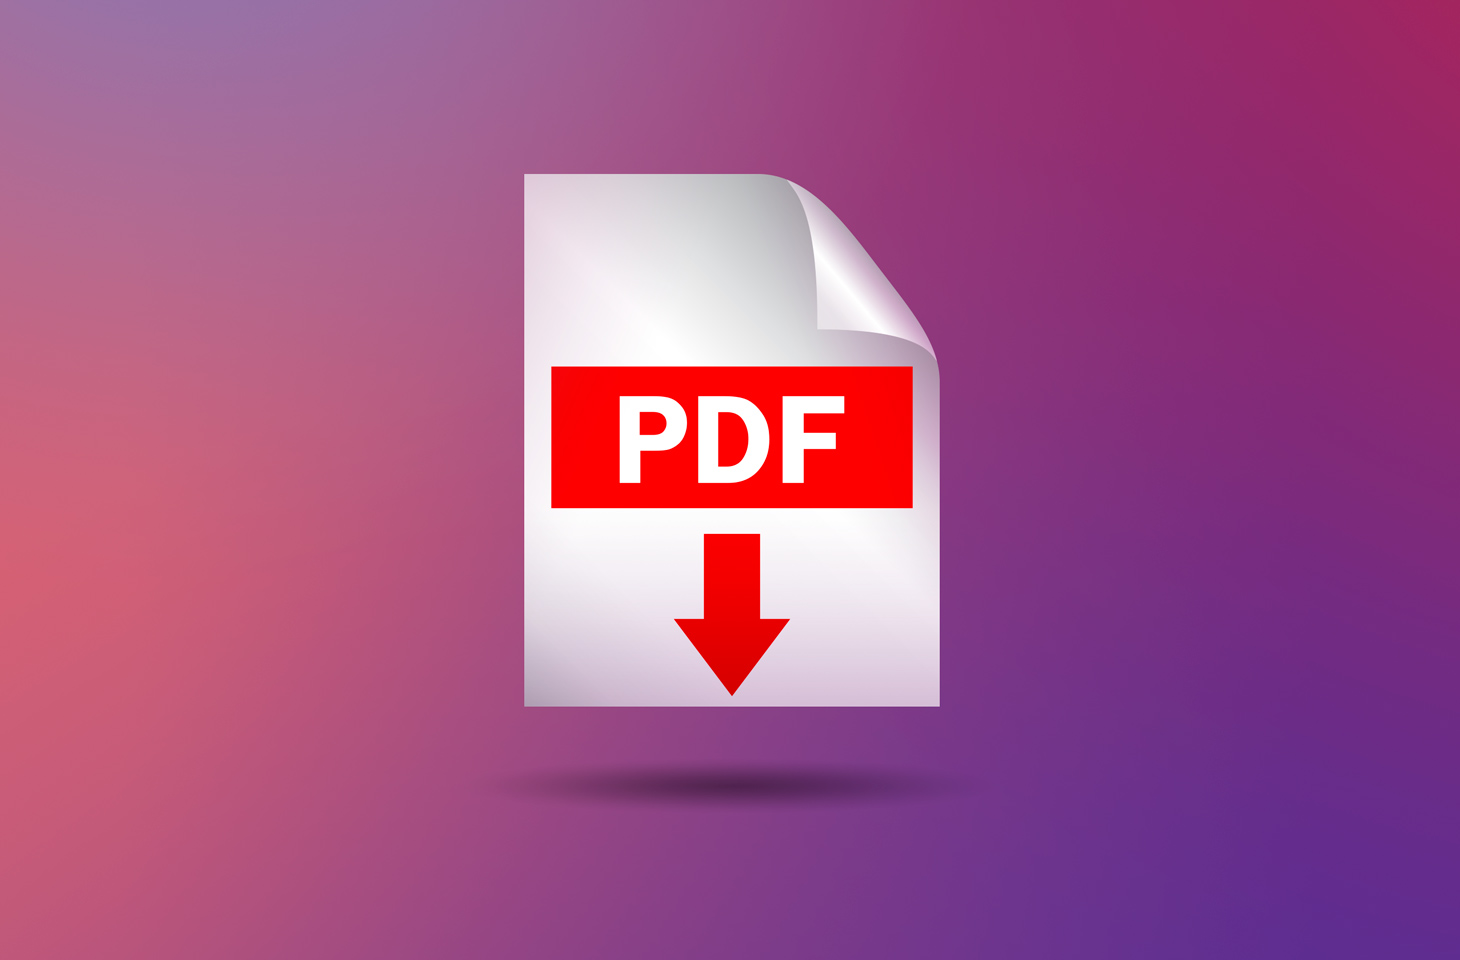 GogoPDF’s PDF Converter: Functions And Features